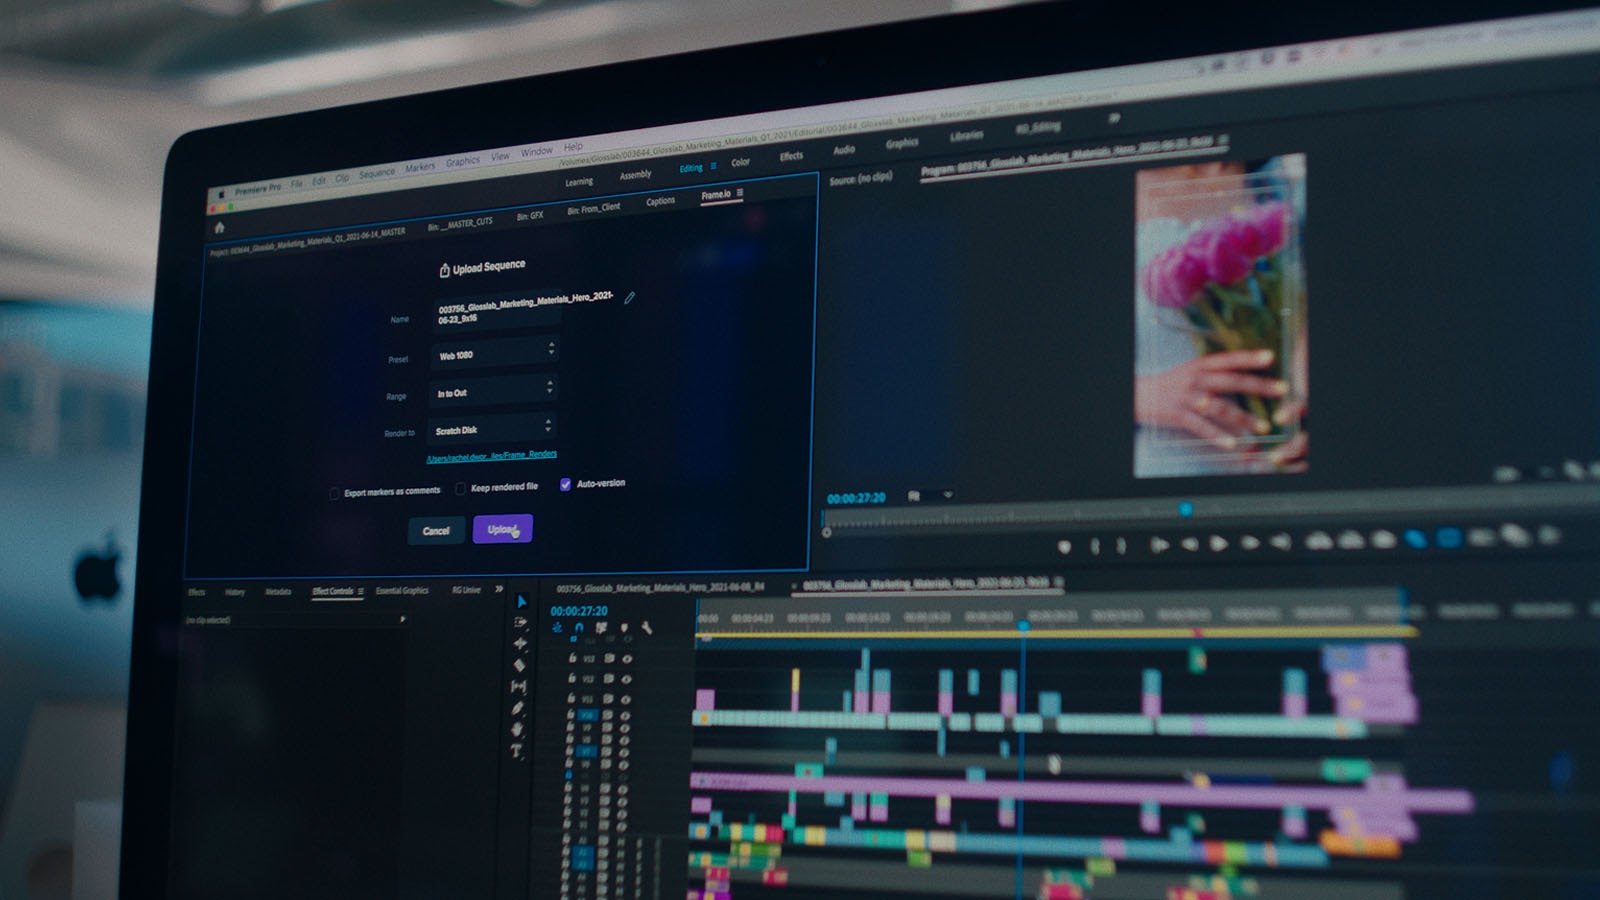 Uploading to Frame.io from within Premiere Pro.